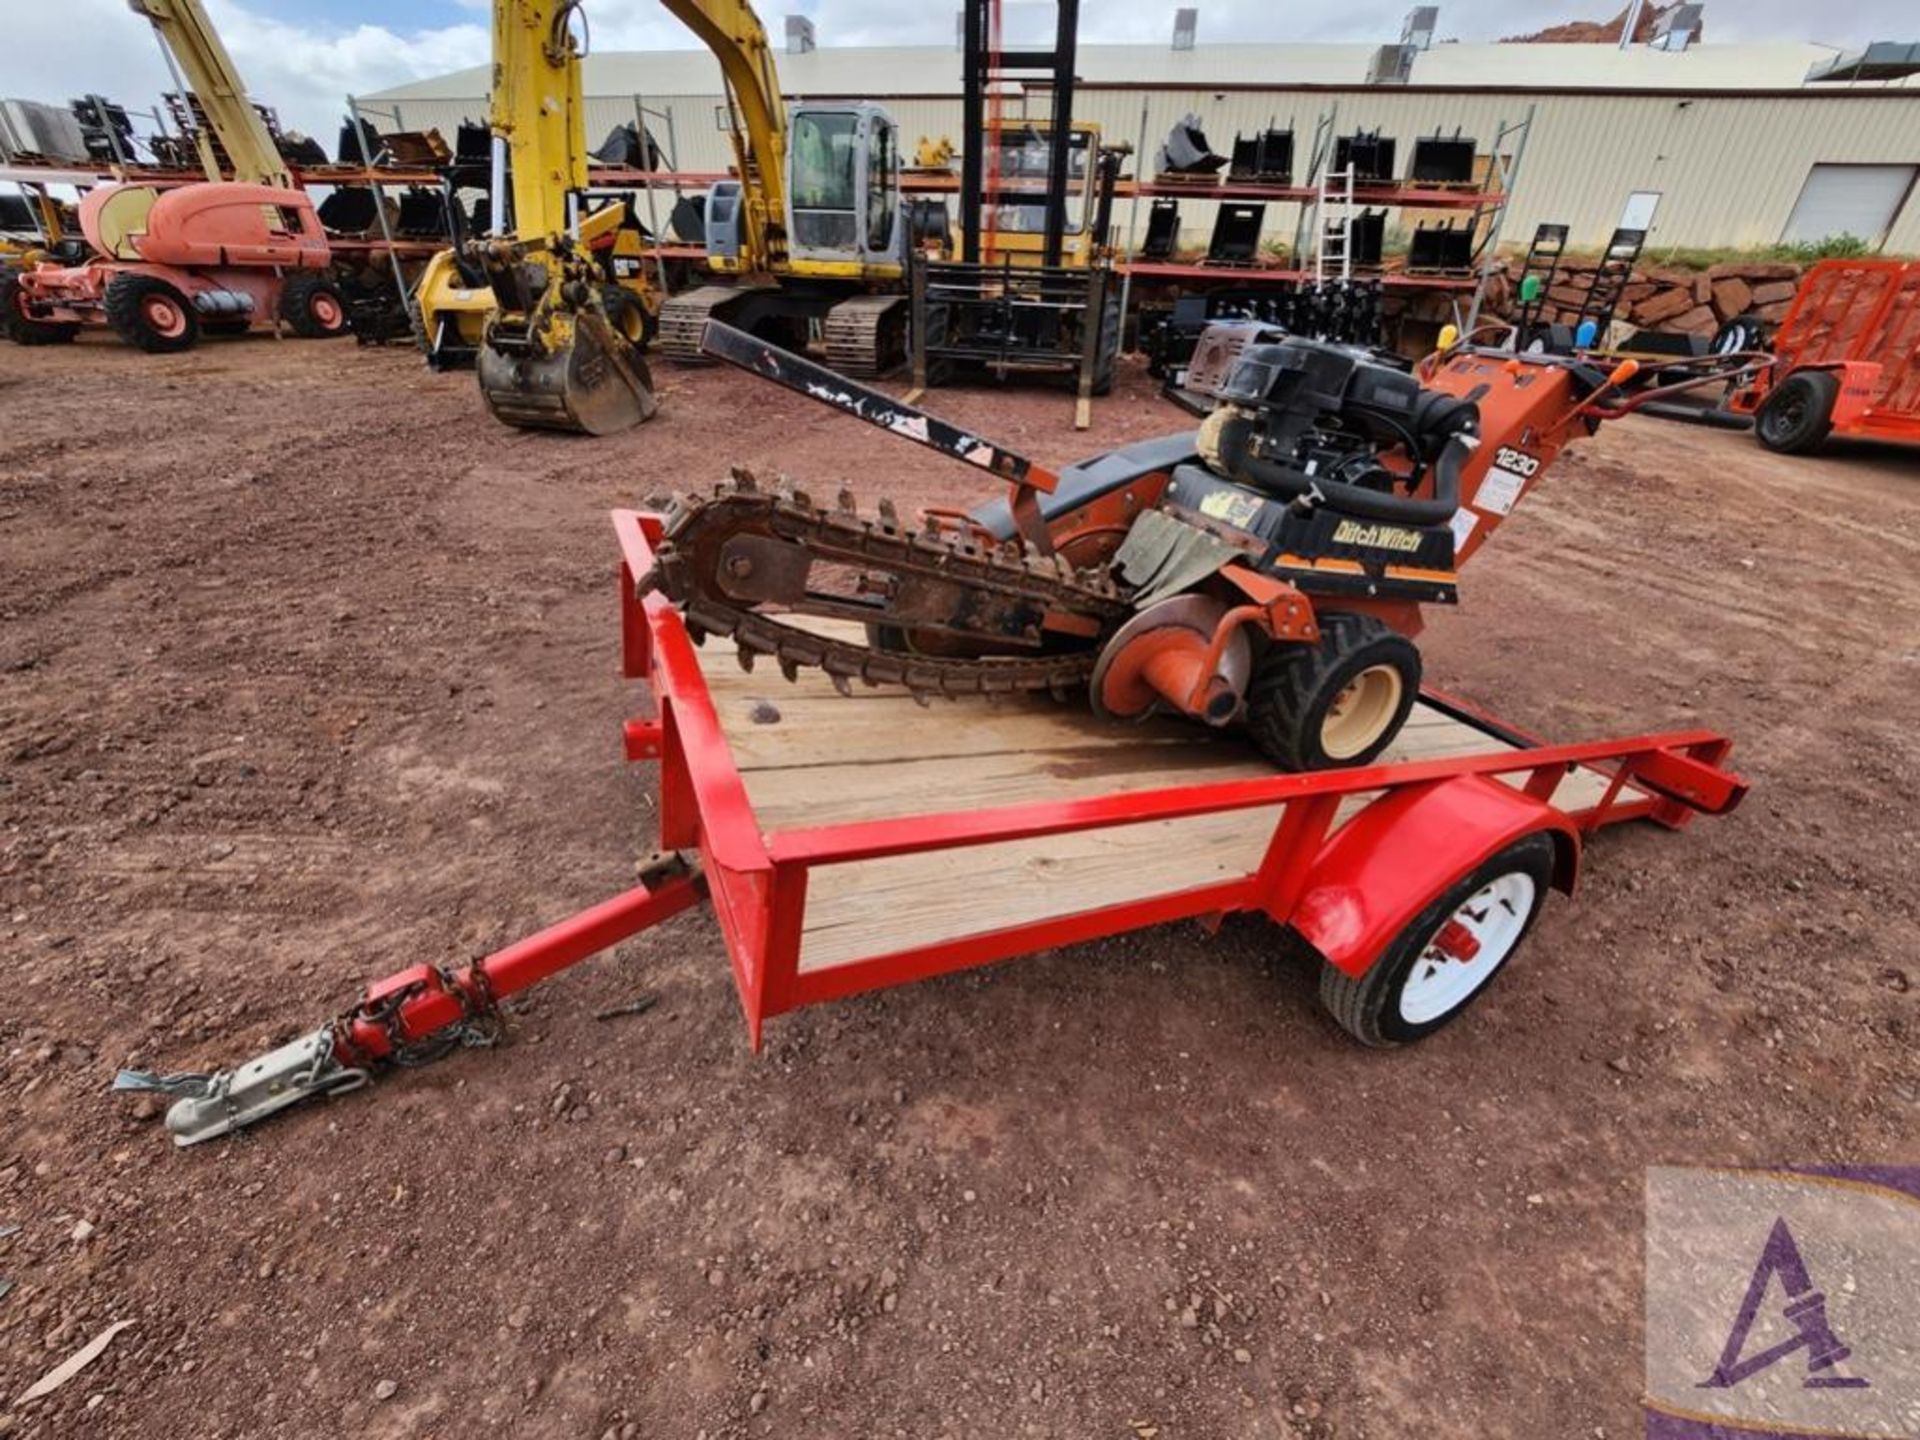 2004 Ditch Witch Trencher - Image 11 of 28